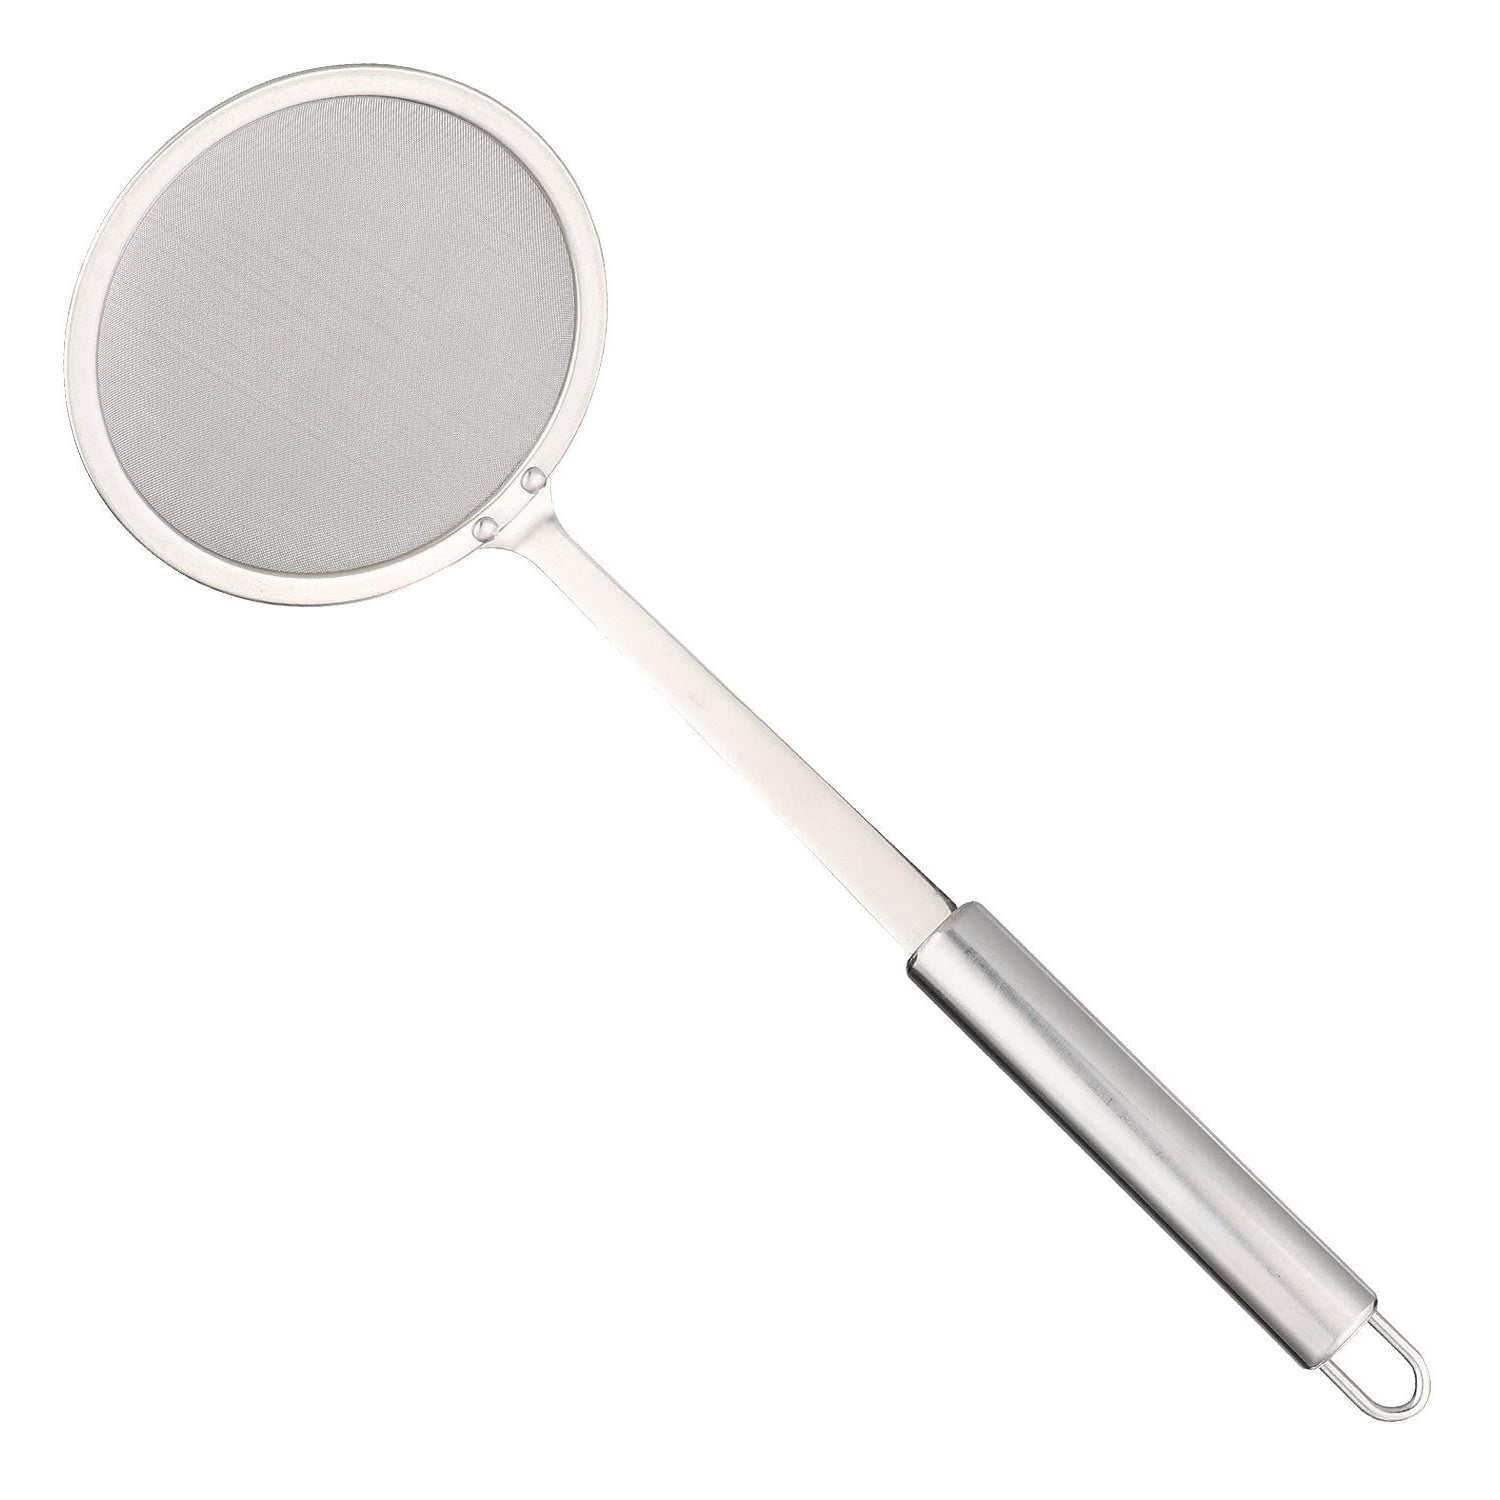 1PC Skimmer Spoon For Hot Pot Mesh Strainer Fat Oil Filters Skimming Grease F ha 